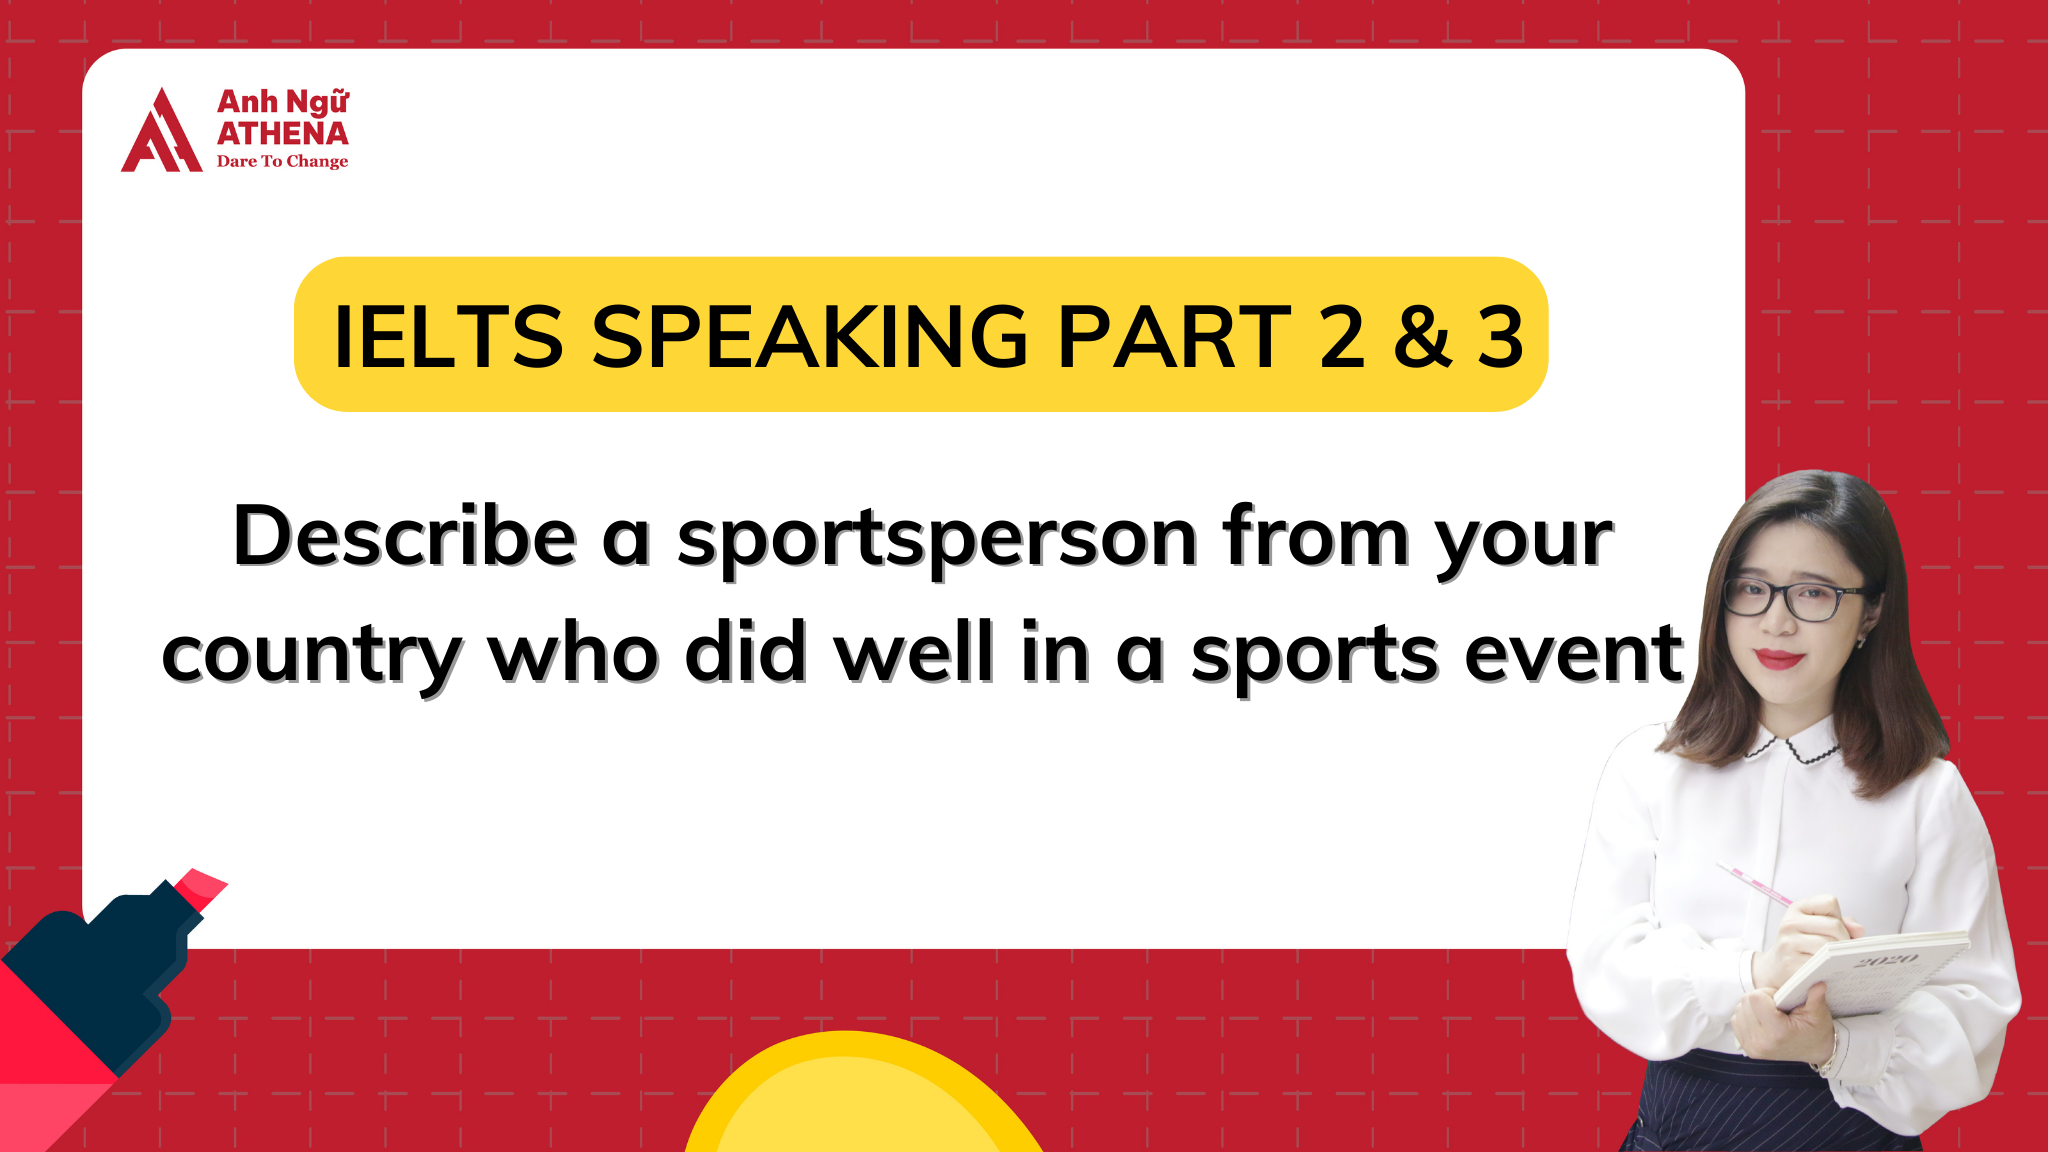 BÀI MẪU IELTS SPEAKING PART 2 & 3 - TOPIC: Describe a sportsperson from your country who did well in a sports event 